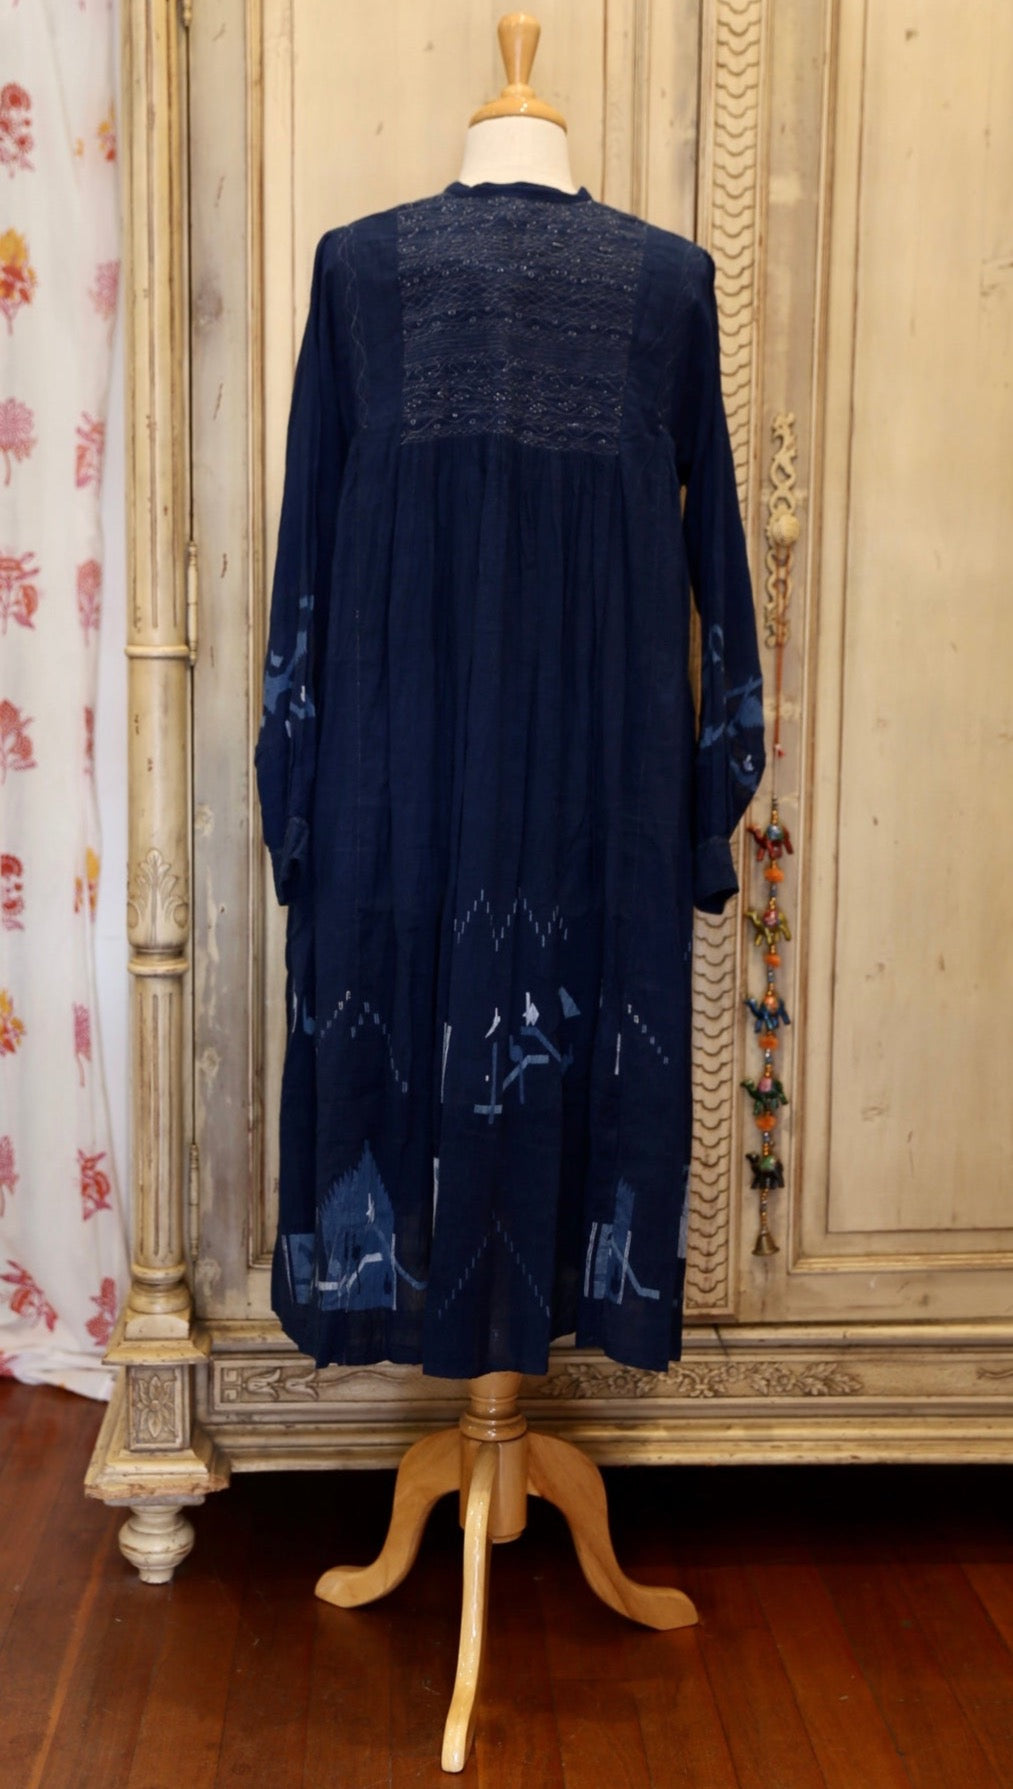 Neel 10 Easy to wear mid length ink blue indigo day dress with round neck and contrasting french blue stitching detail across bodice. The bodice opens down the front and features five tiny hand wrought buttons sewn in contrasting thread. 